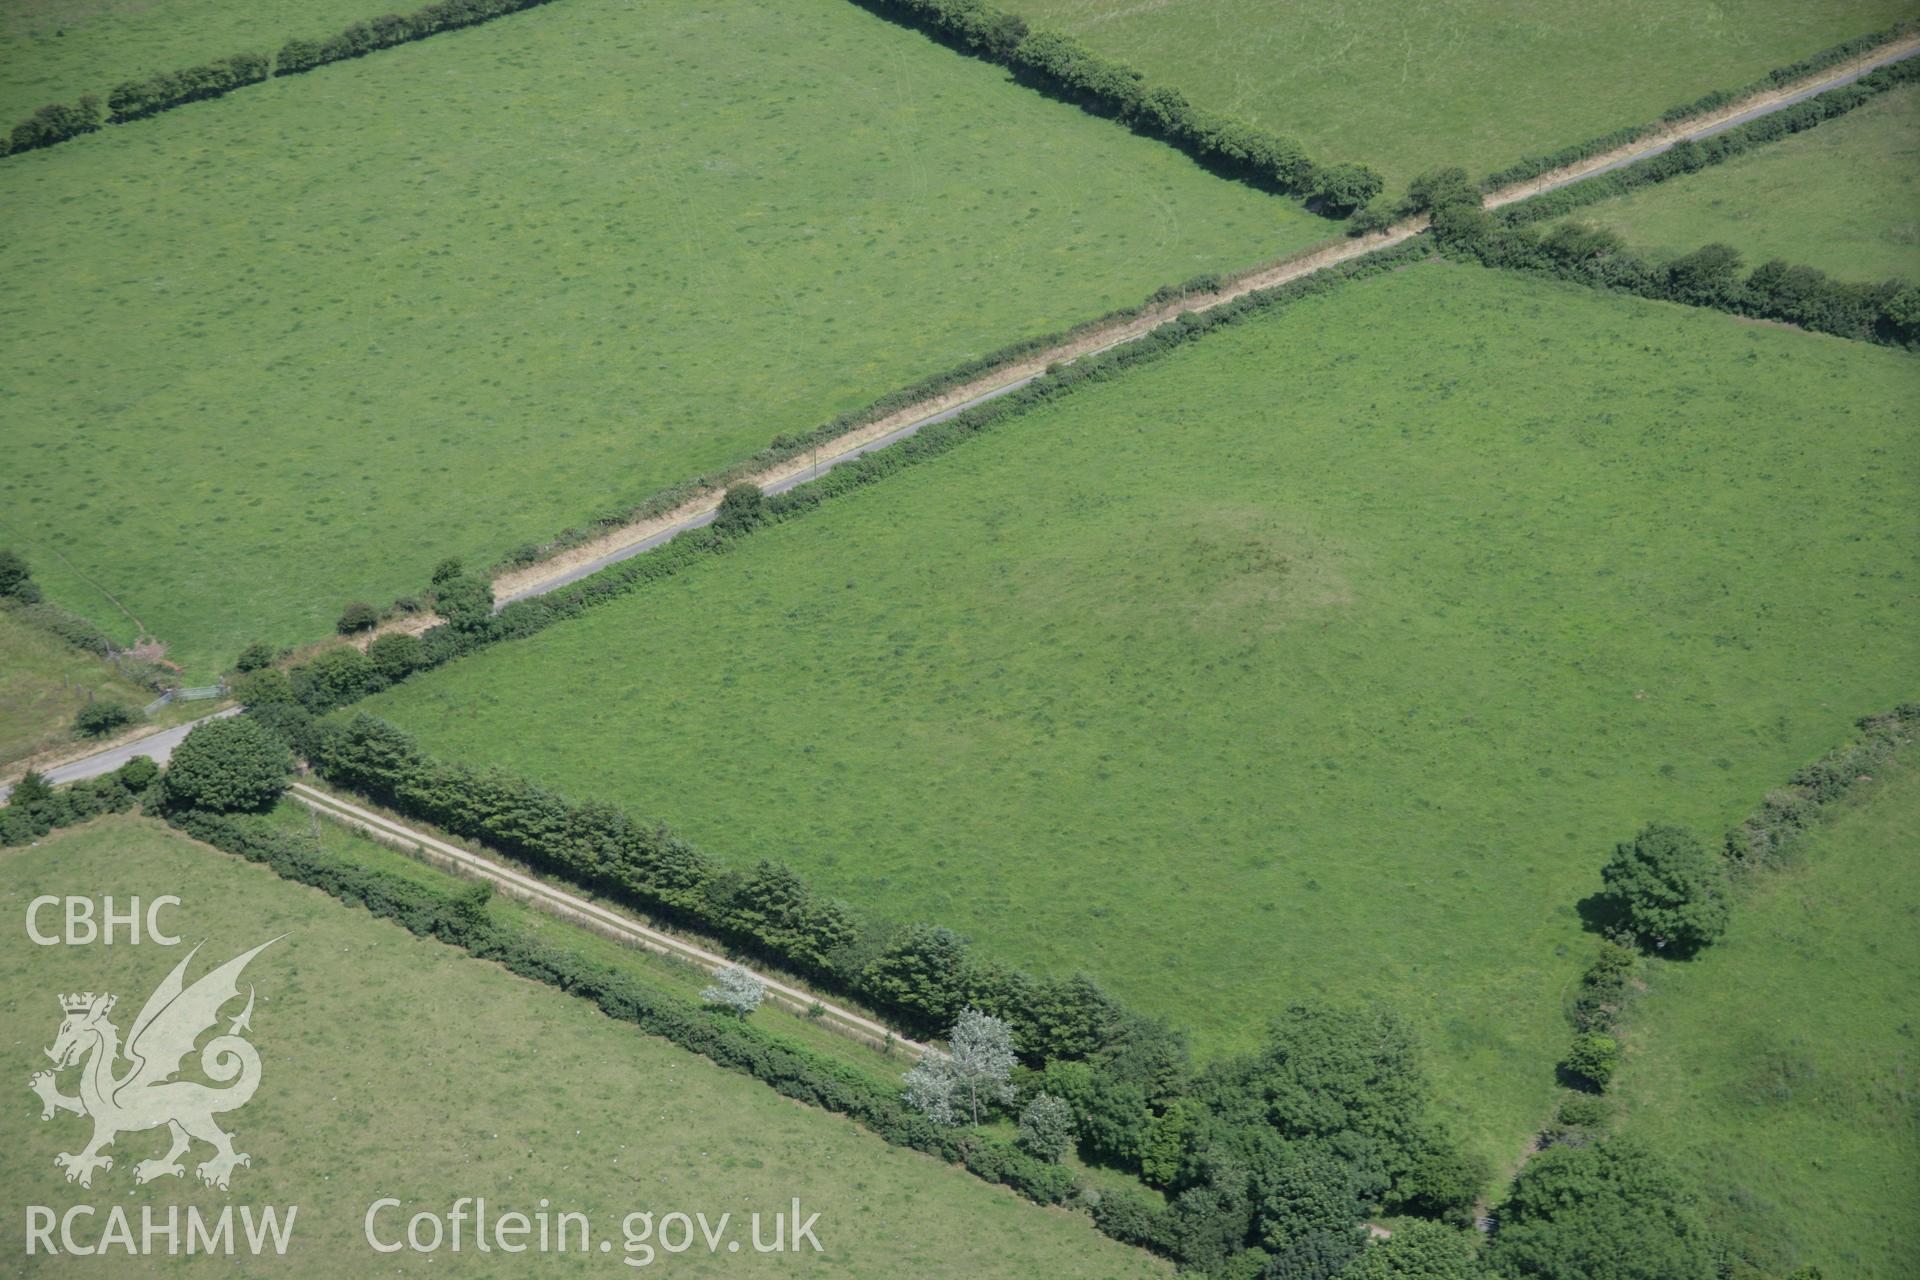 RCAHMW colour oblique aerial photograph of Foxhill Round Barrow. Taken on 11 July 2005 by Toby Driver